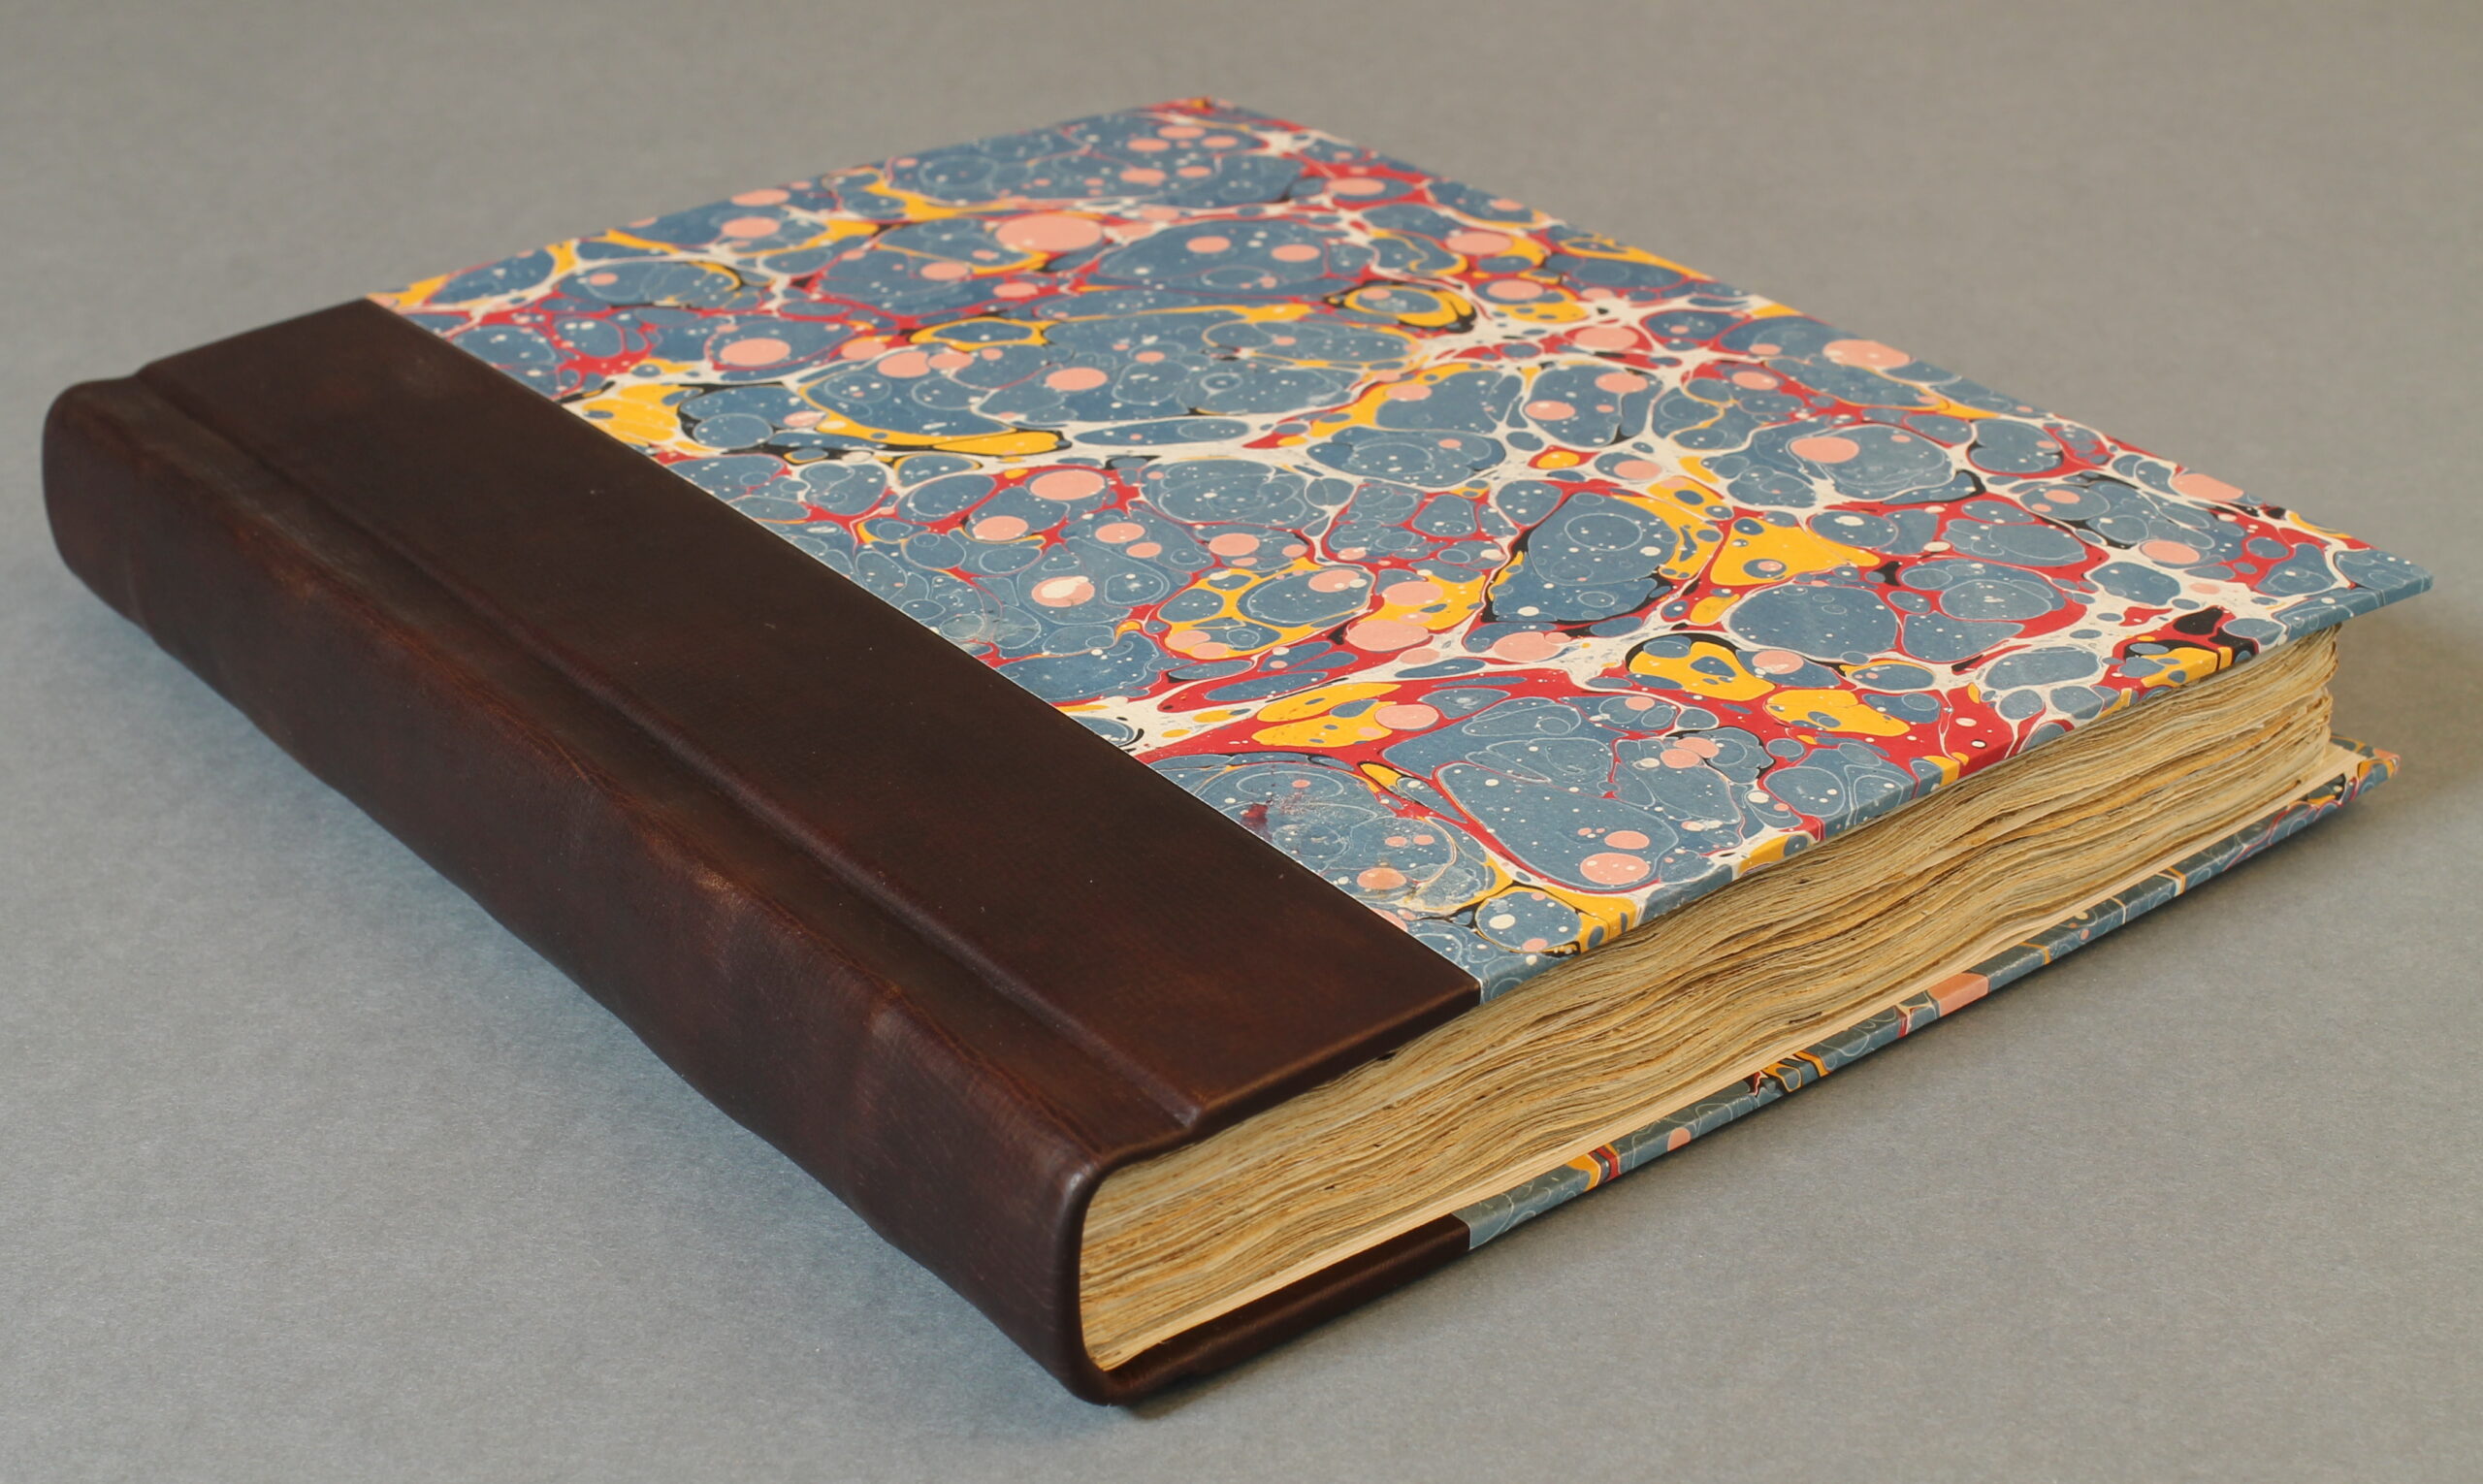 An early 19th century stationery binding